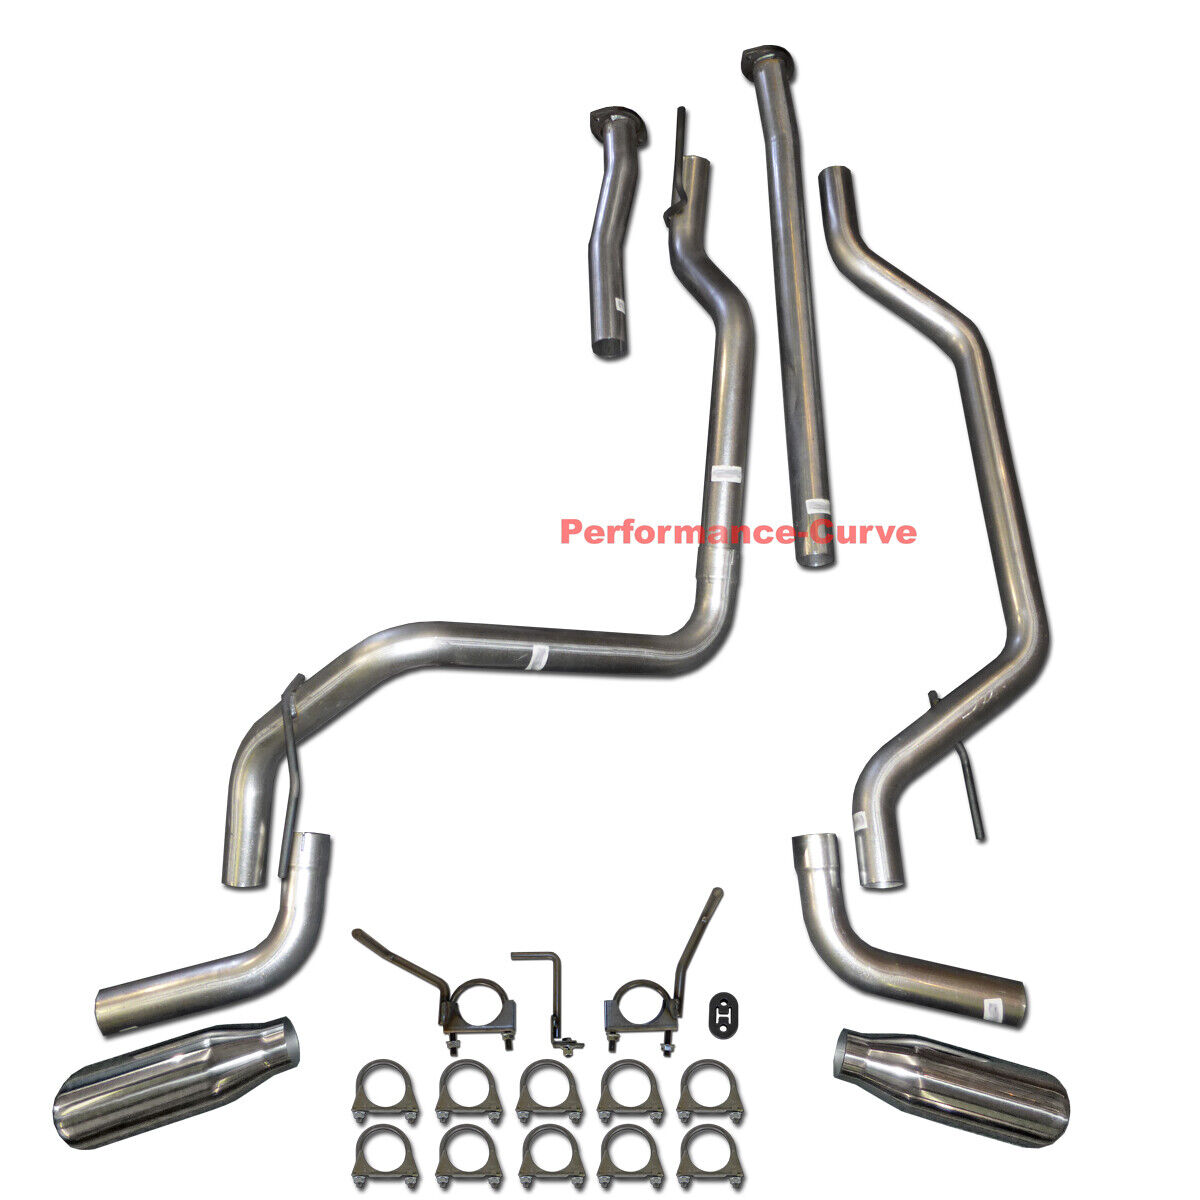 Fits 09 - 20 Toyota Tundra 4.0 - 5.7 Performance Dual Exhaust CatBack Pipe Kit